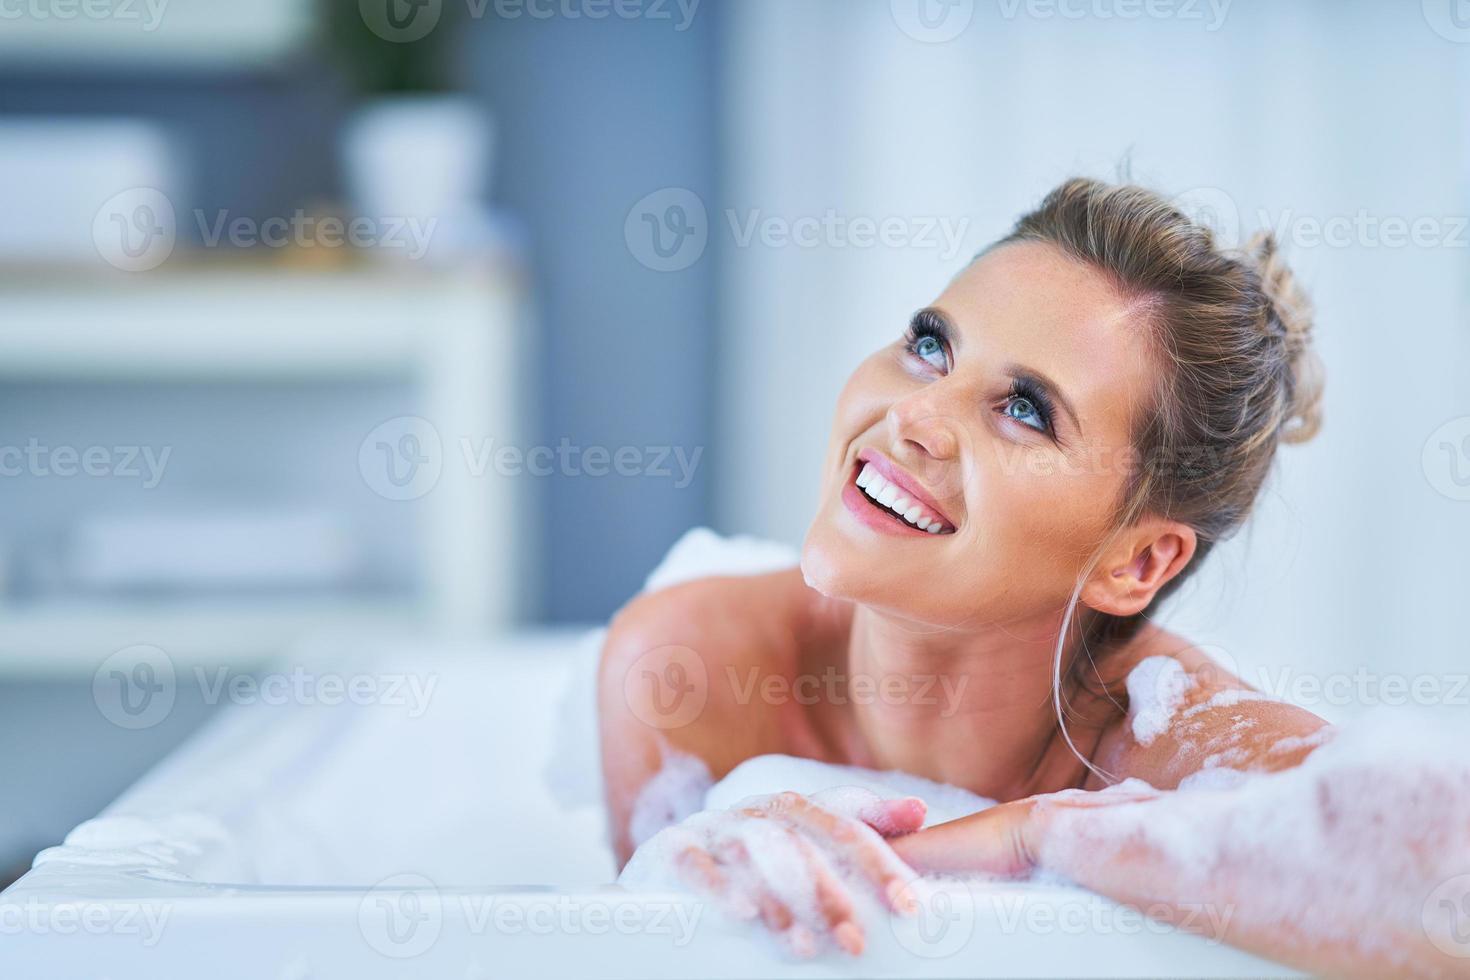 Close-up portrait of a young woman relaxing in the bathtube photo